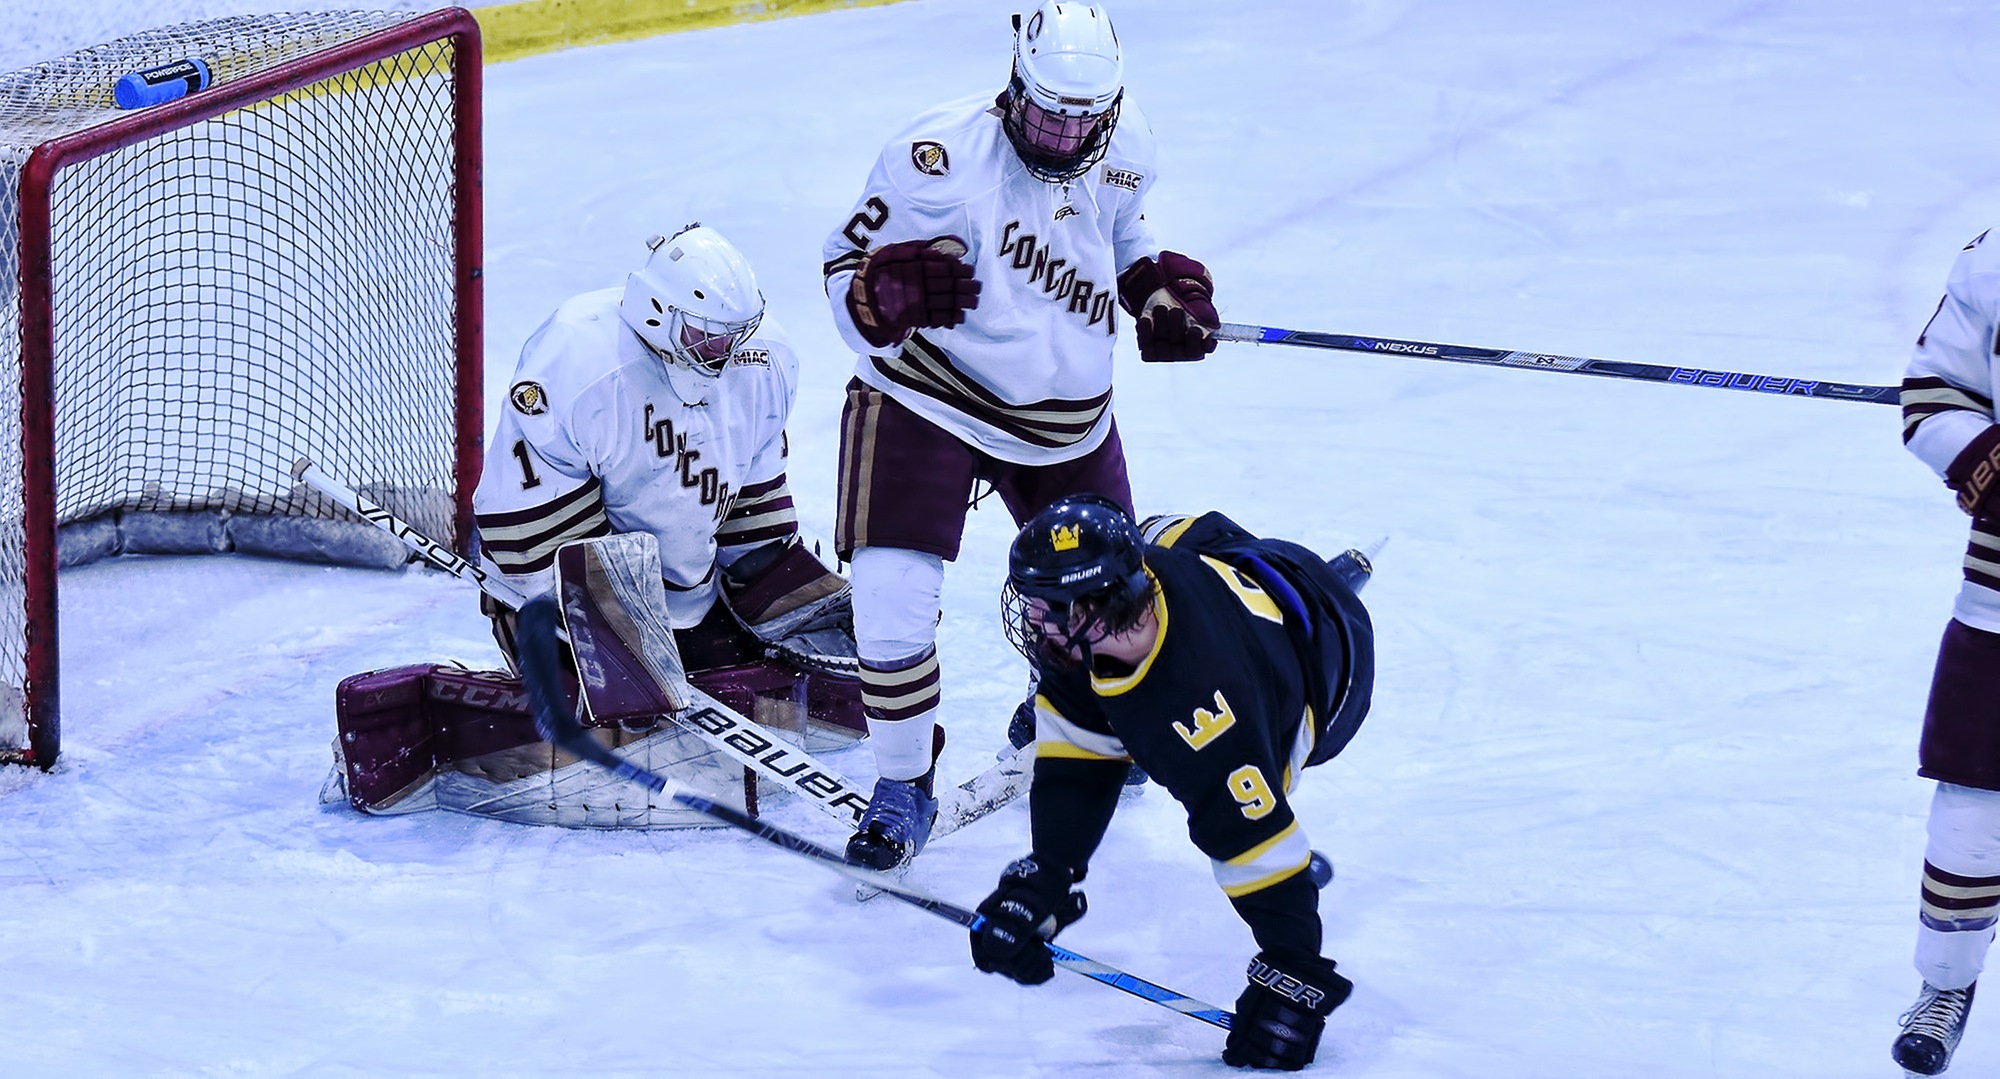 Junior Alex Stoley (#2) knocked down Gustavus in the series opener in St. Peter as he scored the game-winning goal with 1:41 left in regulation to help the Cobbers post a 3-2 victory.